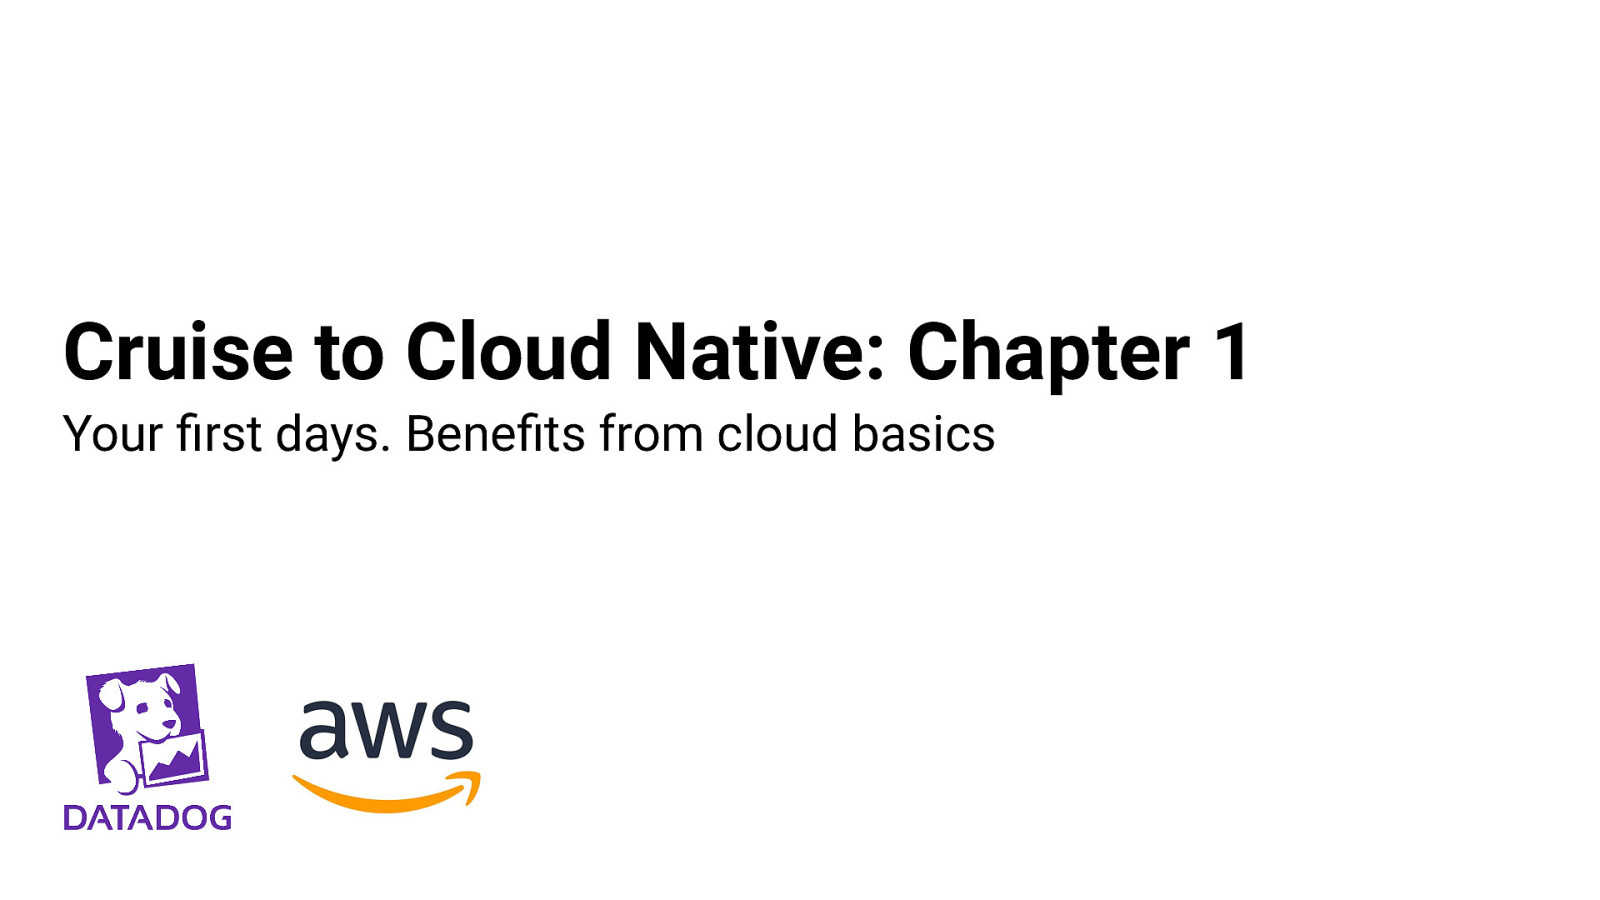 Cruise to Cloud Native: Chapter 1. Your first days. Benefits from cloud basics.